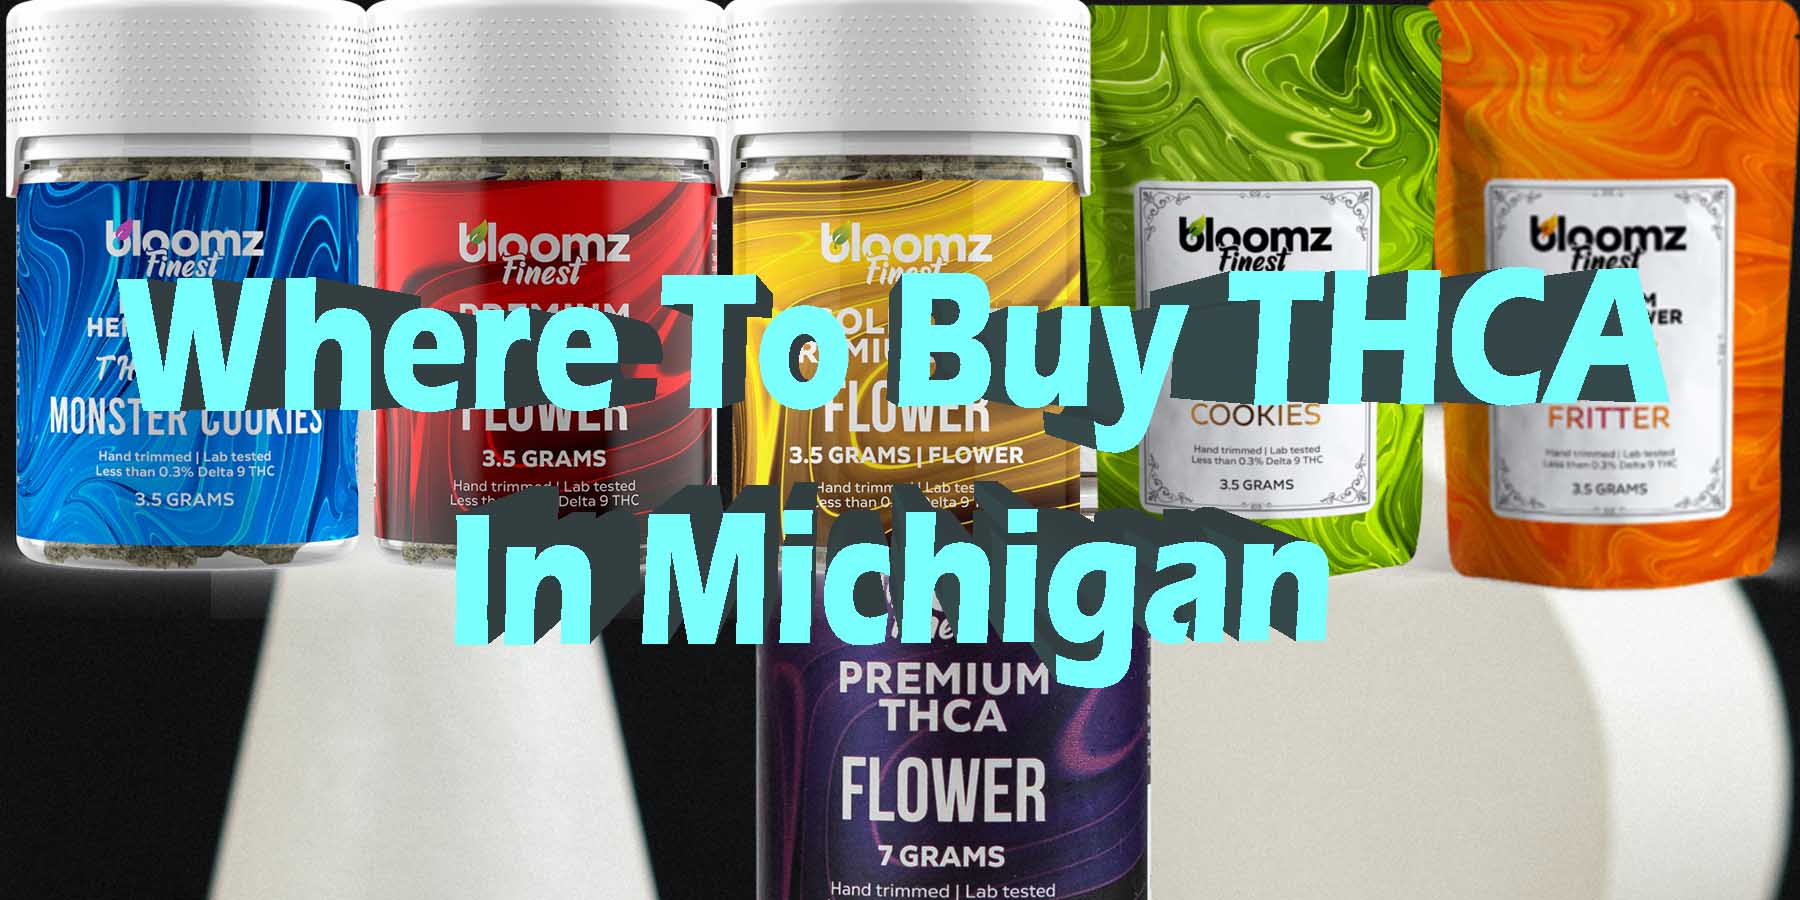 Where To Buy THCA In Michigan WhereToGet HowToGetNearMe BestPlace LowestPrice Coupon Discount For Smoking Best High Smoke Shop Online Near Me StrongestBrand BestBrand Binoid Bloomz